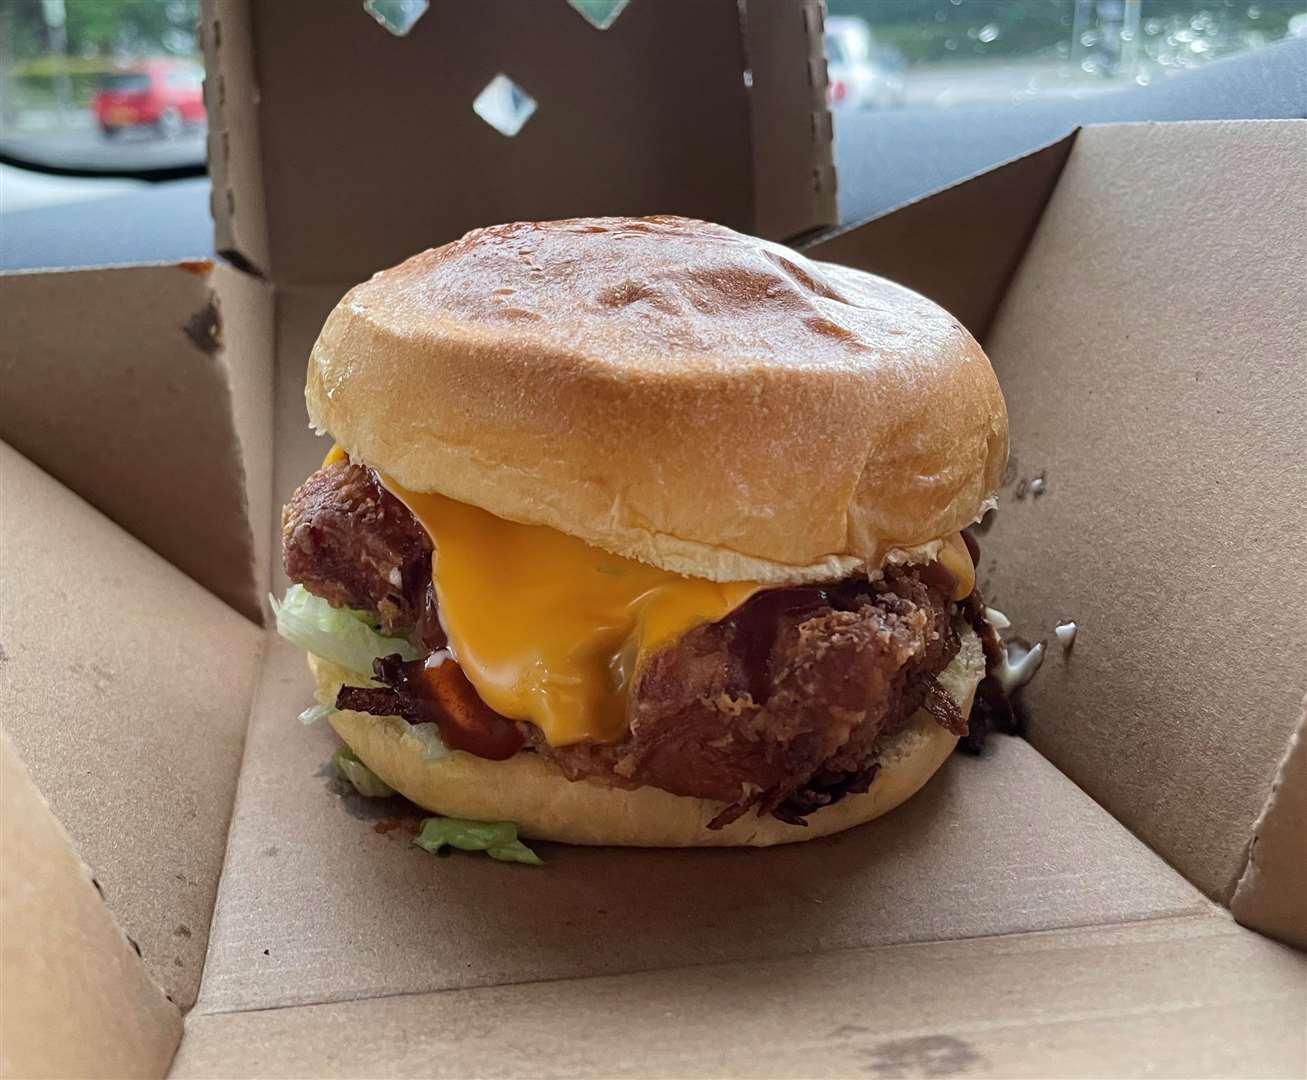 The Smug Chicken burger was the best item we had